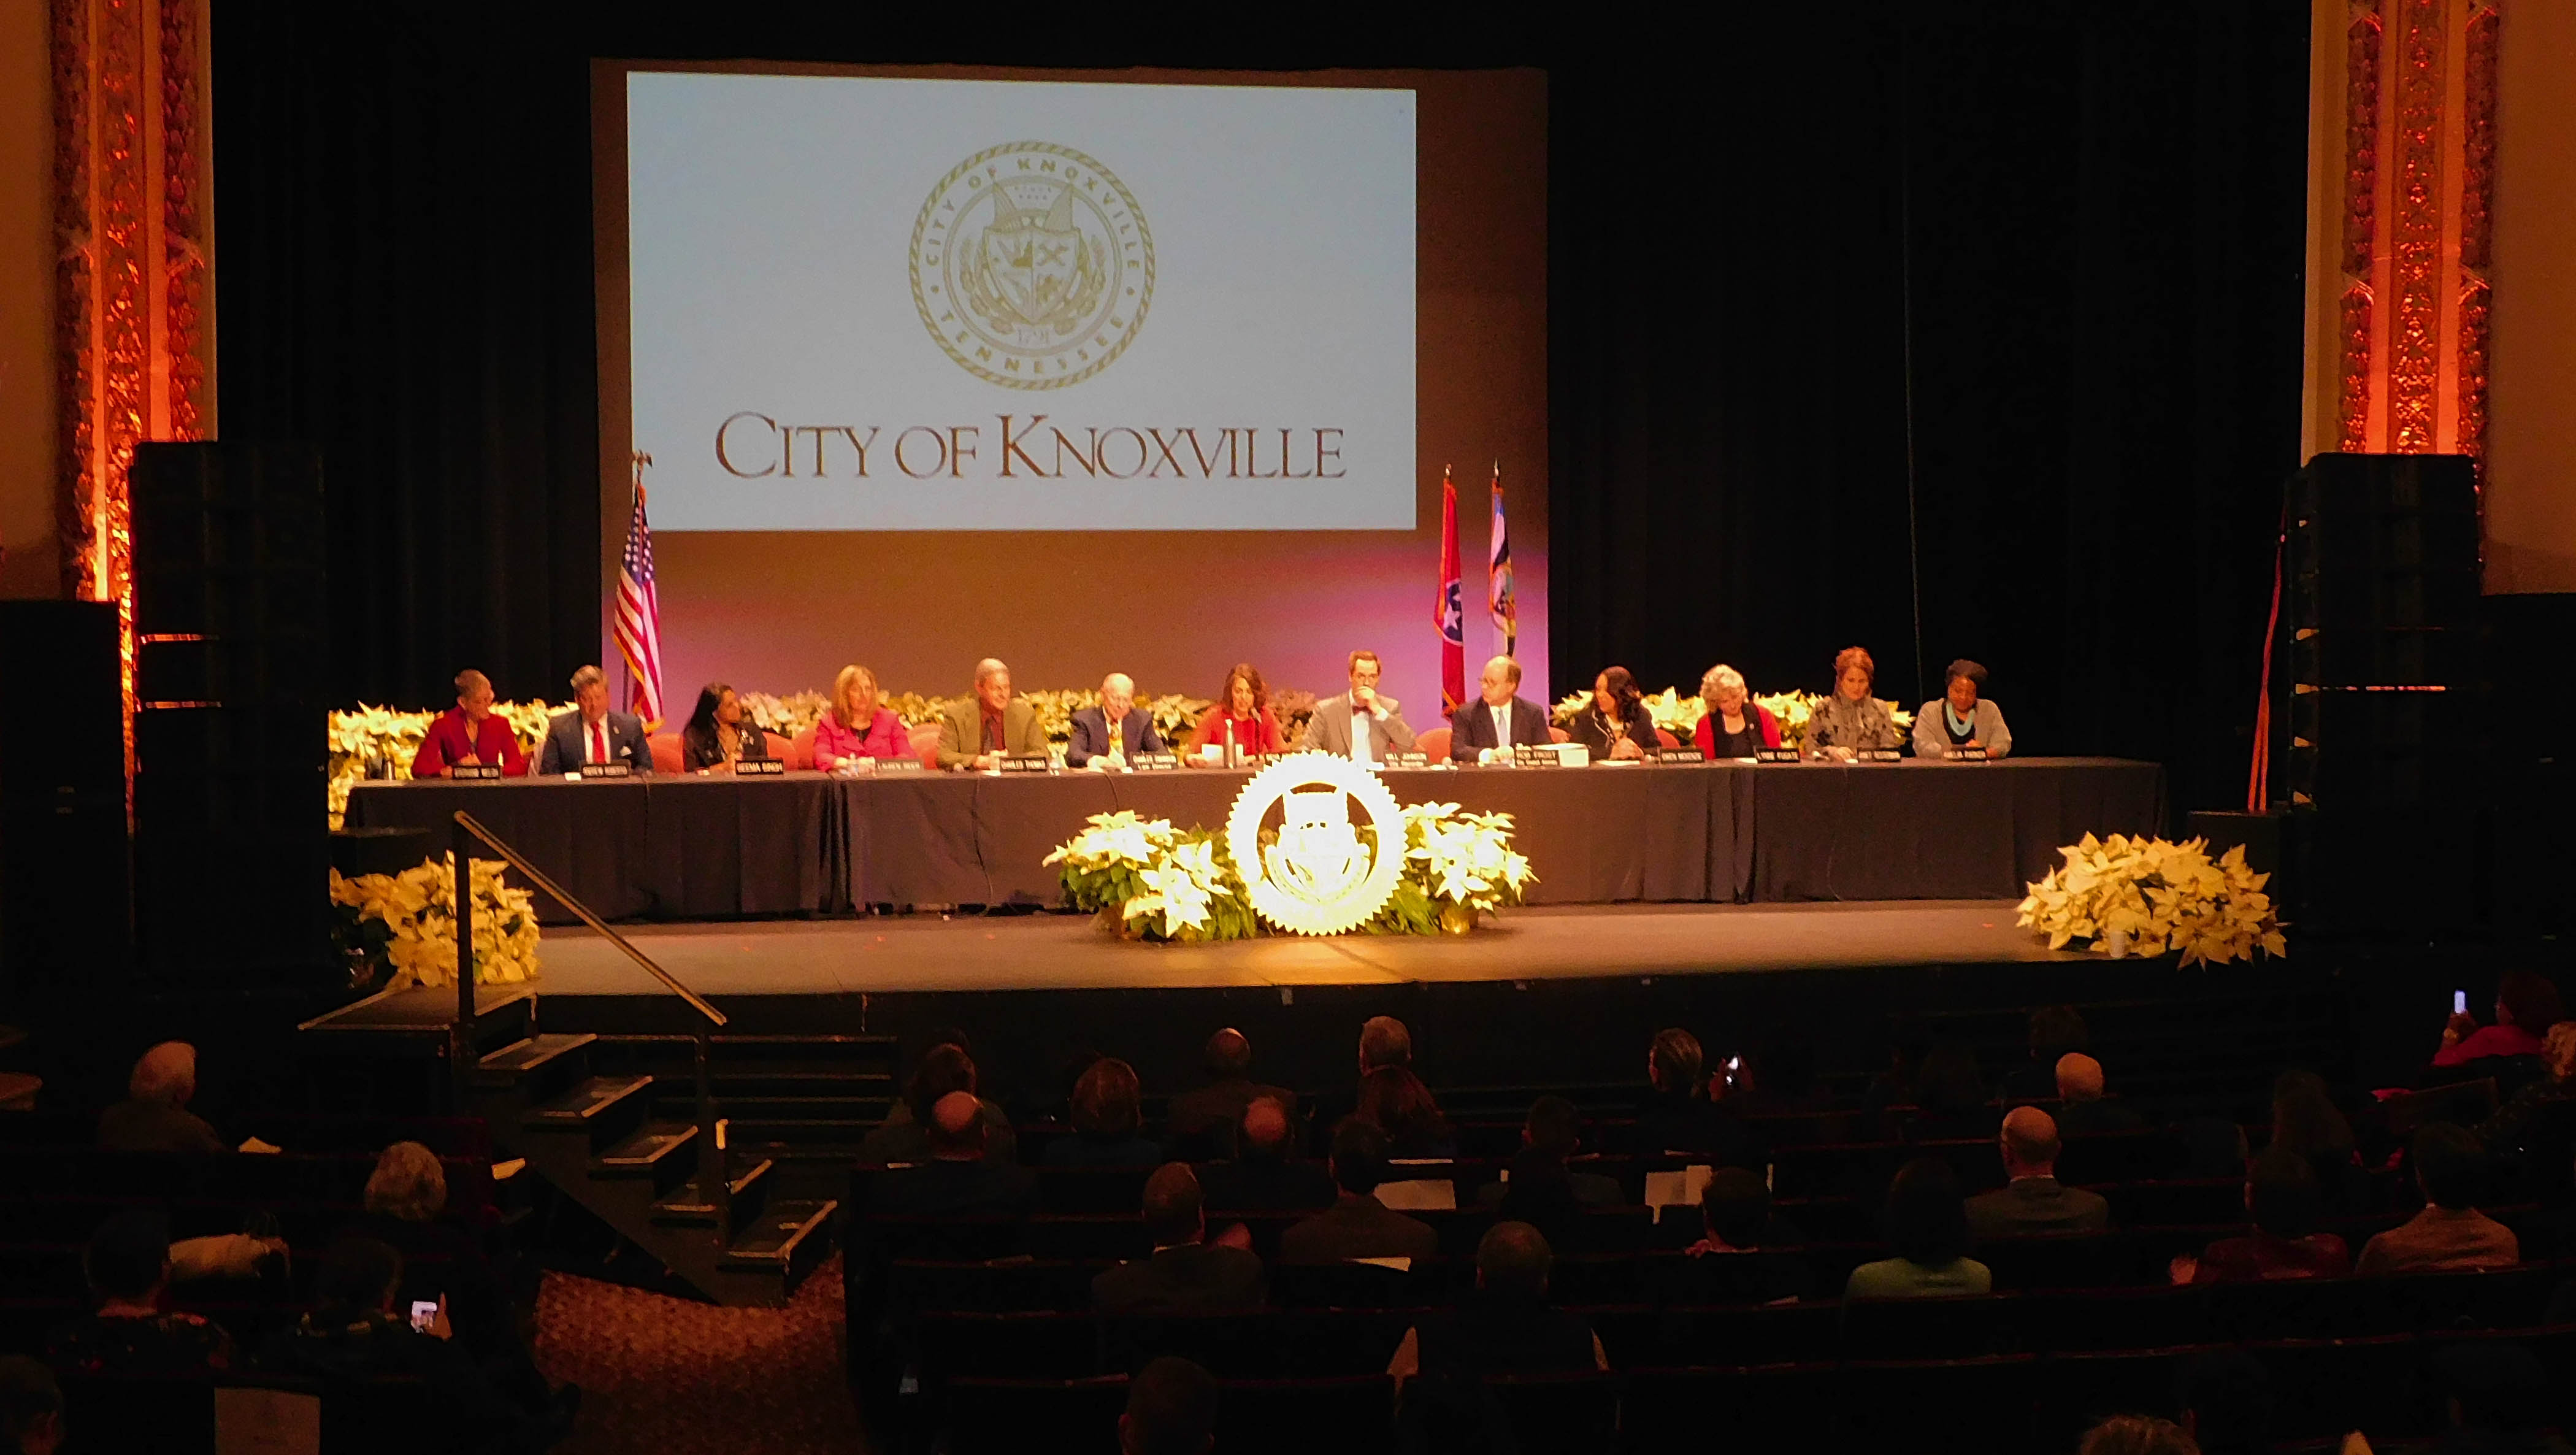 Words of inspiration given at city inauguration ceremony